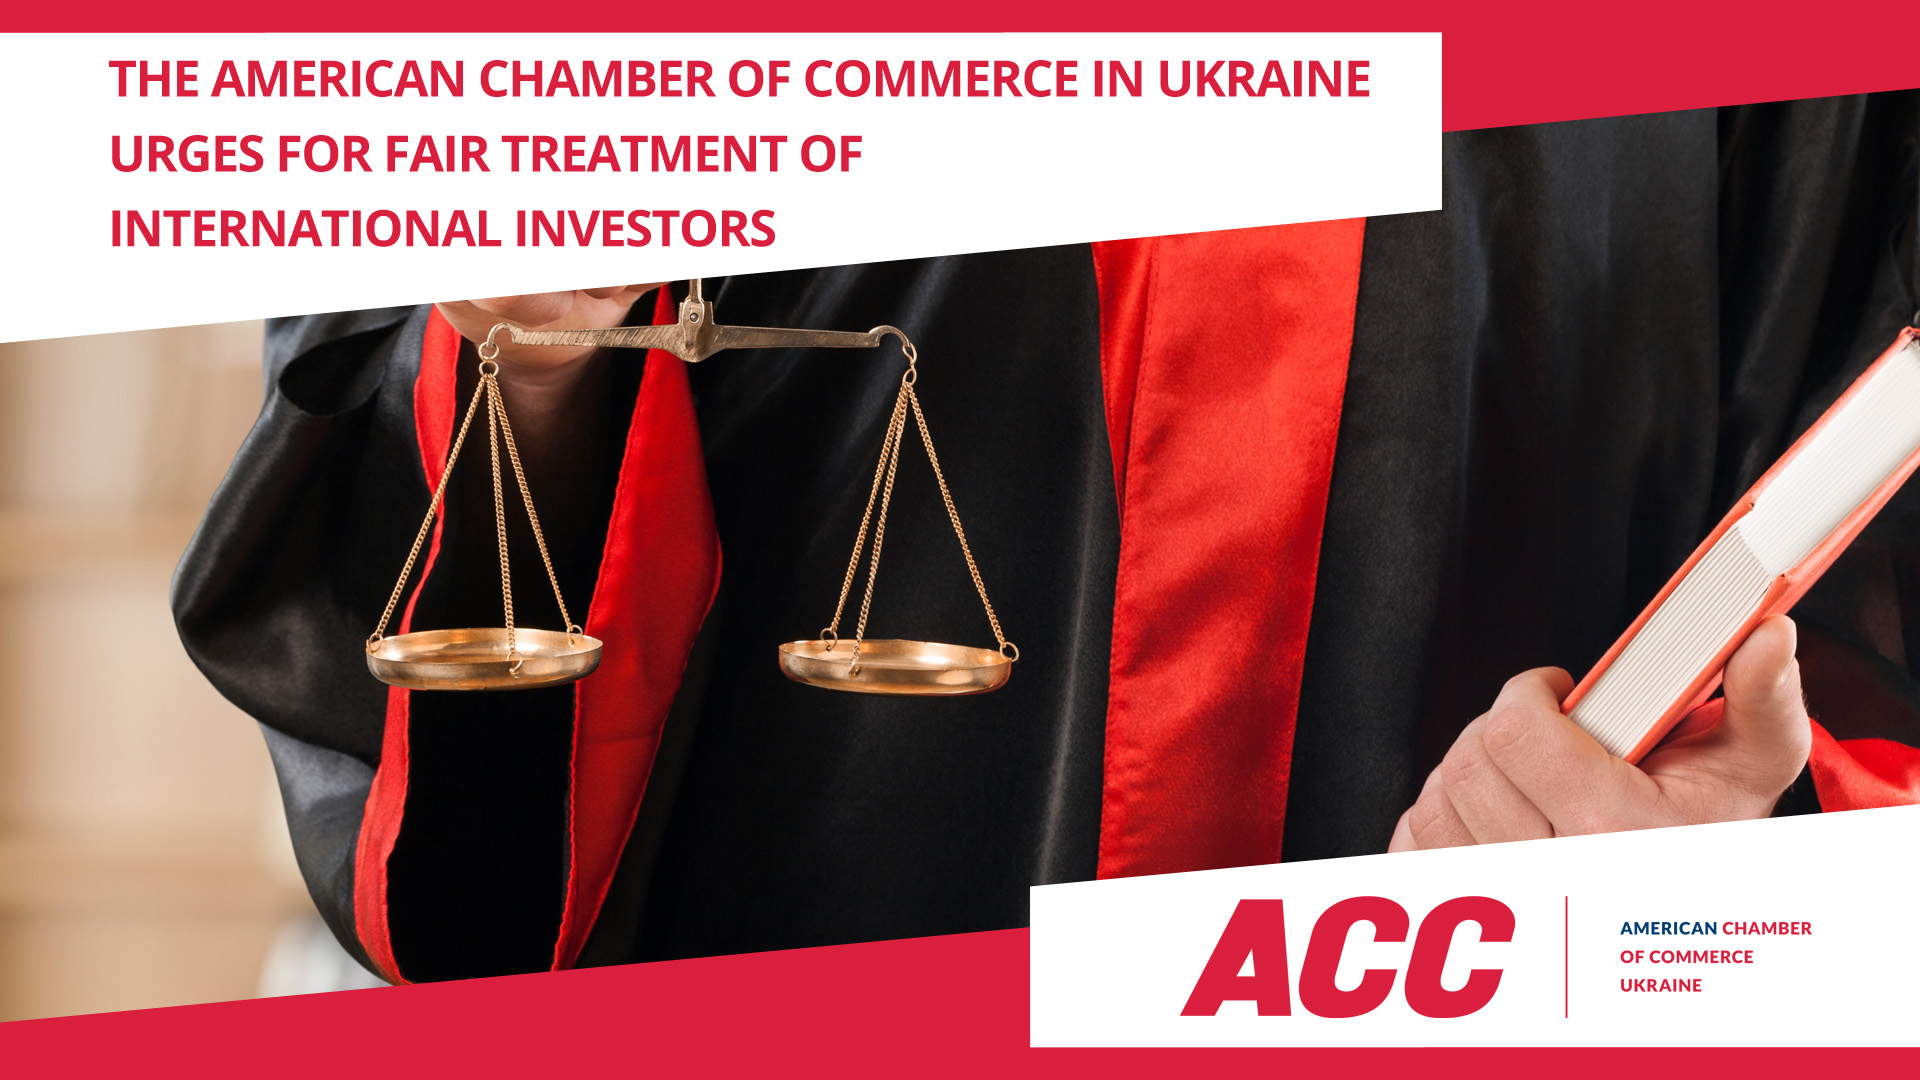 The American Chamber of Commerce in Ukraine urges for fair treatment of international investors